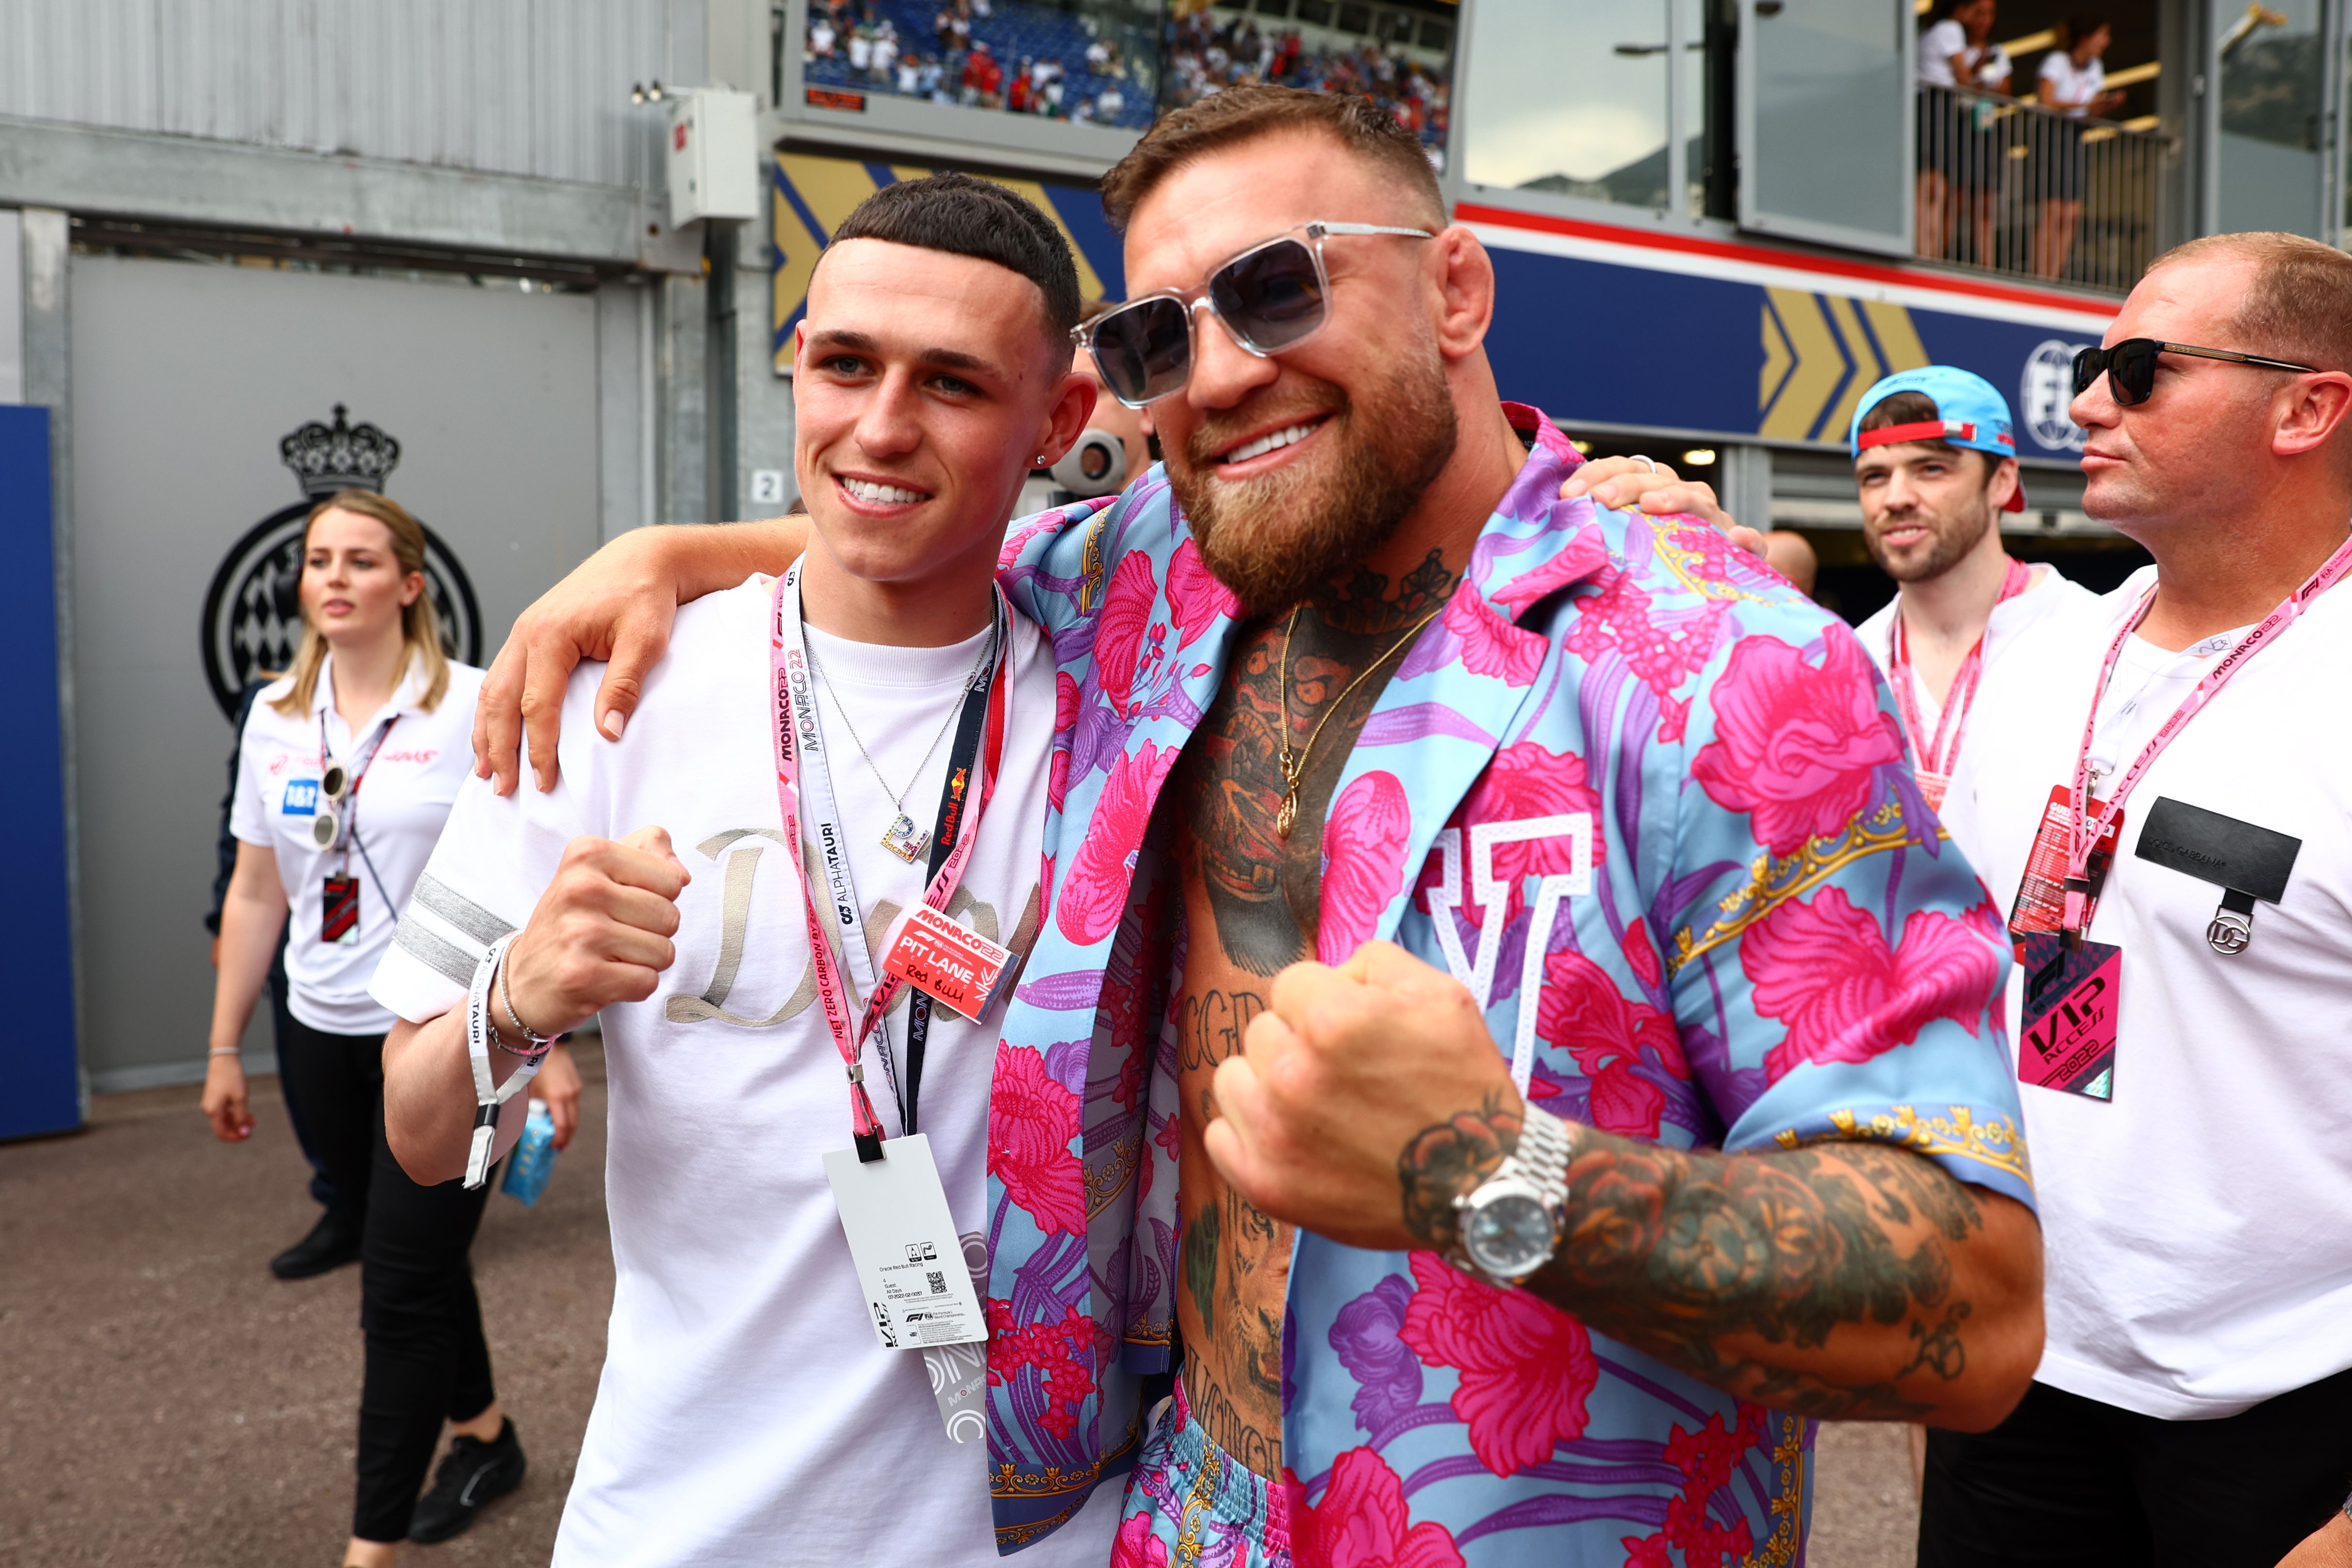 Former world champion thinks Jake Paul could pose a threat to Conor McGregor  in an MMA fight - AS USA